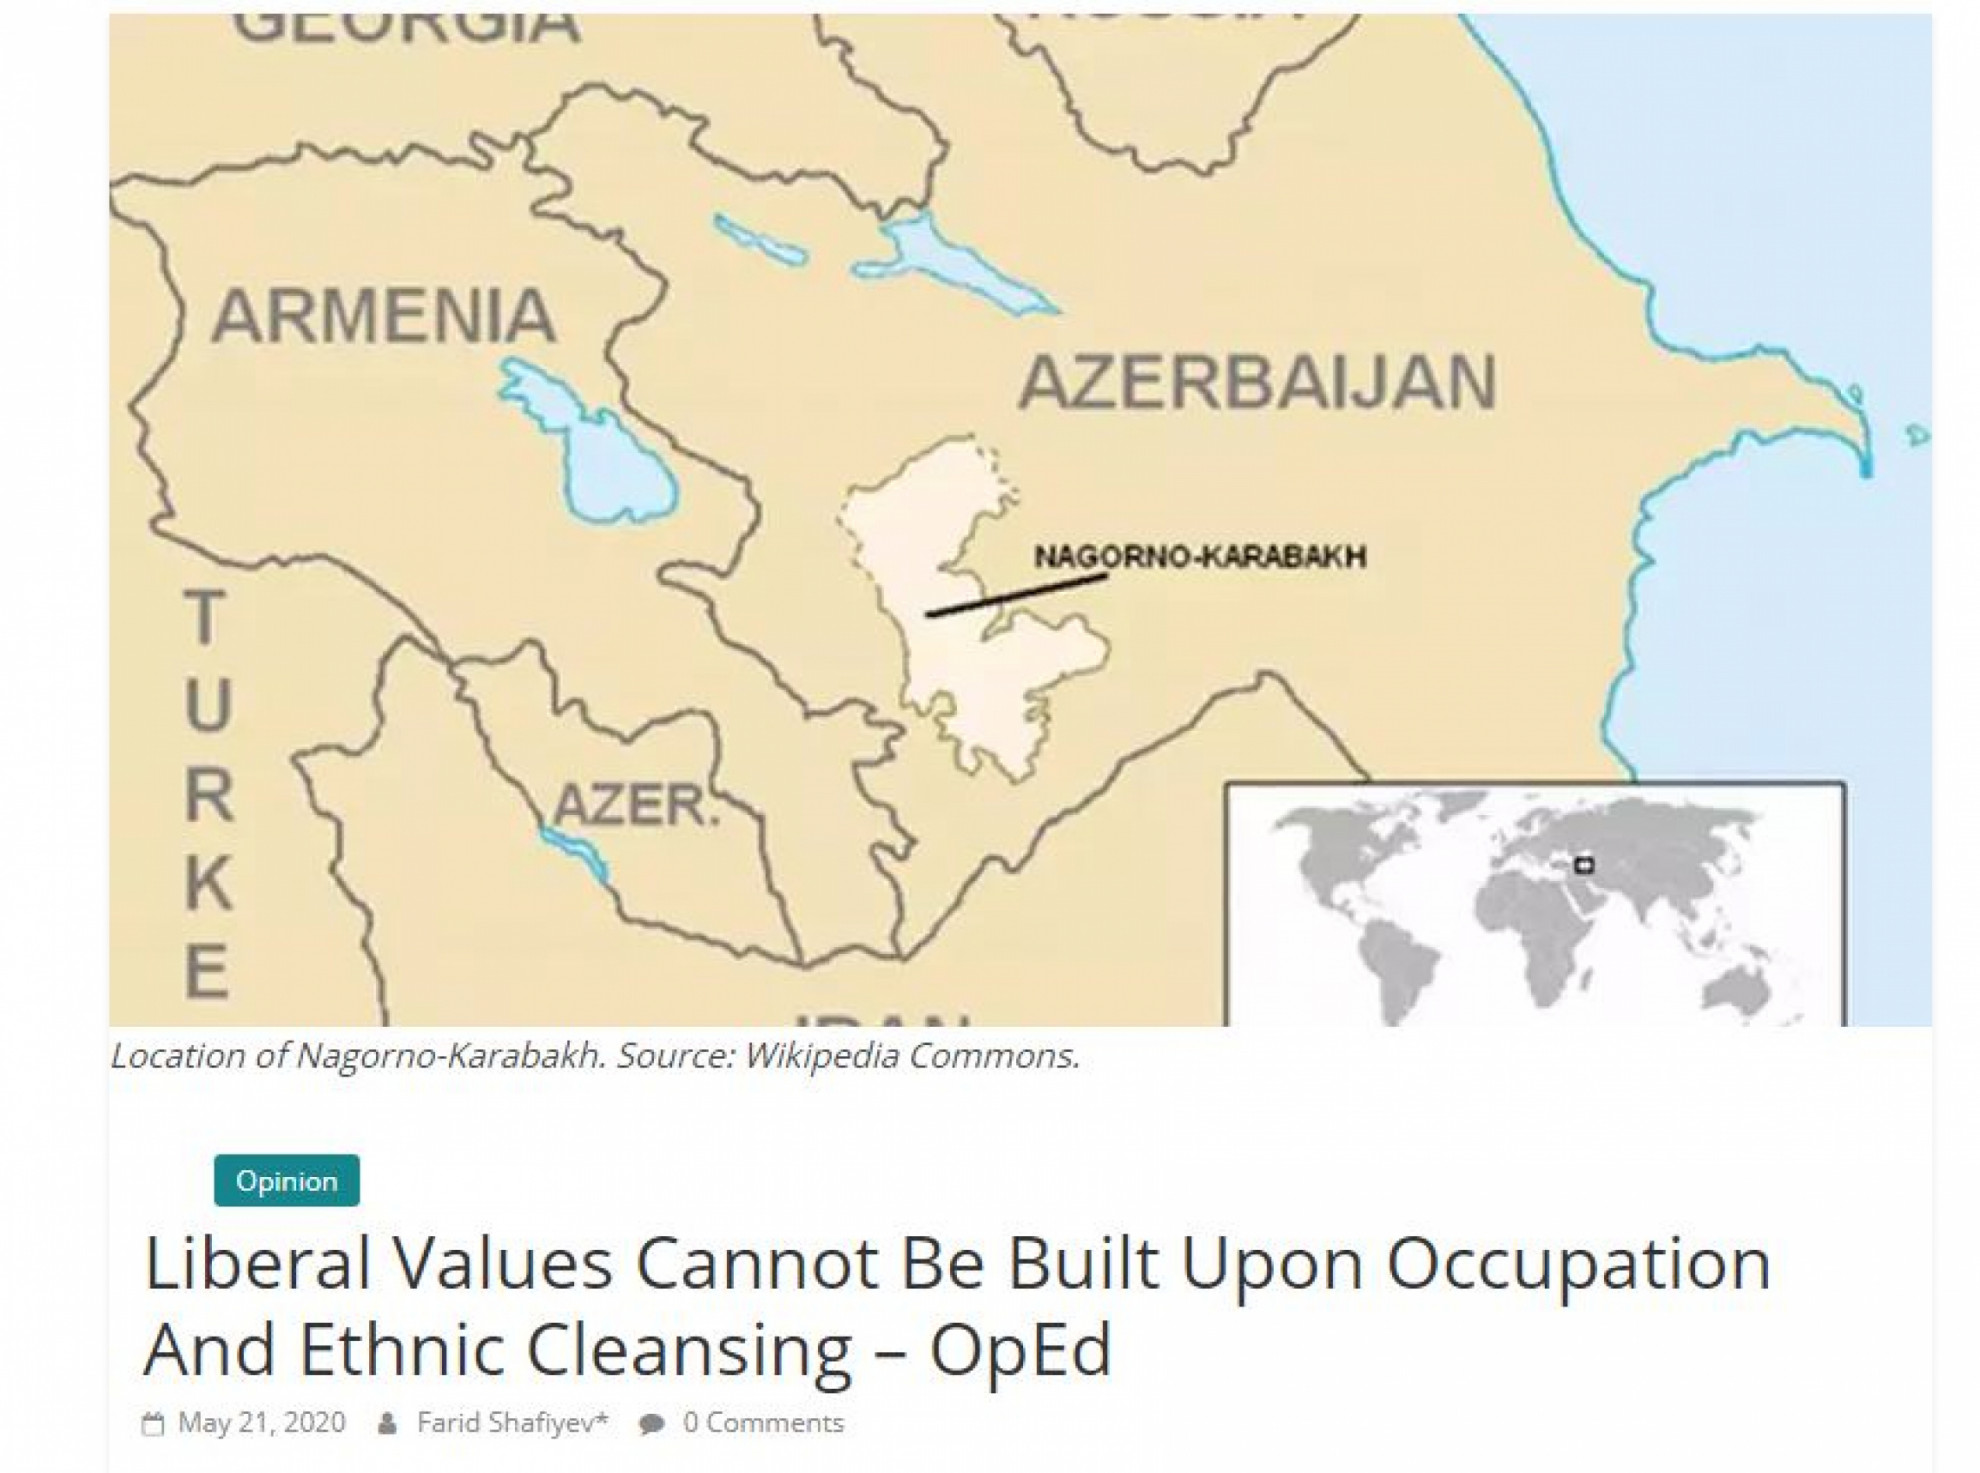 Liberal Values Cannot Be Built Upon Occupation And Ethnic Cleansing – OpEd